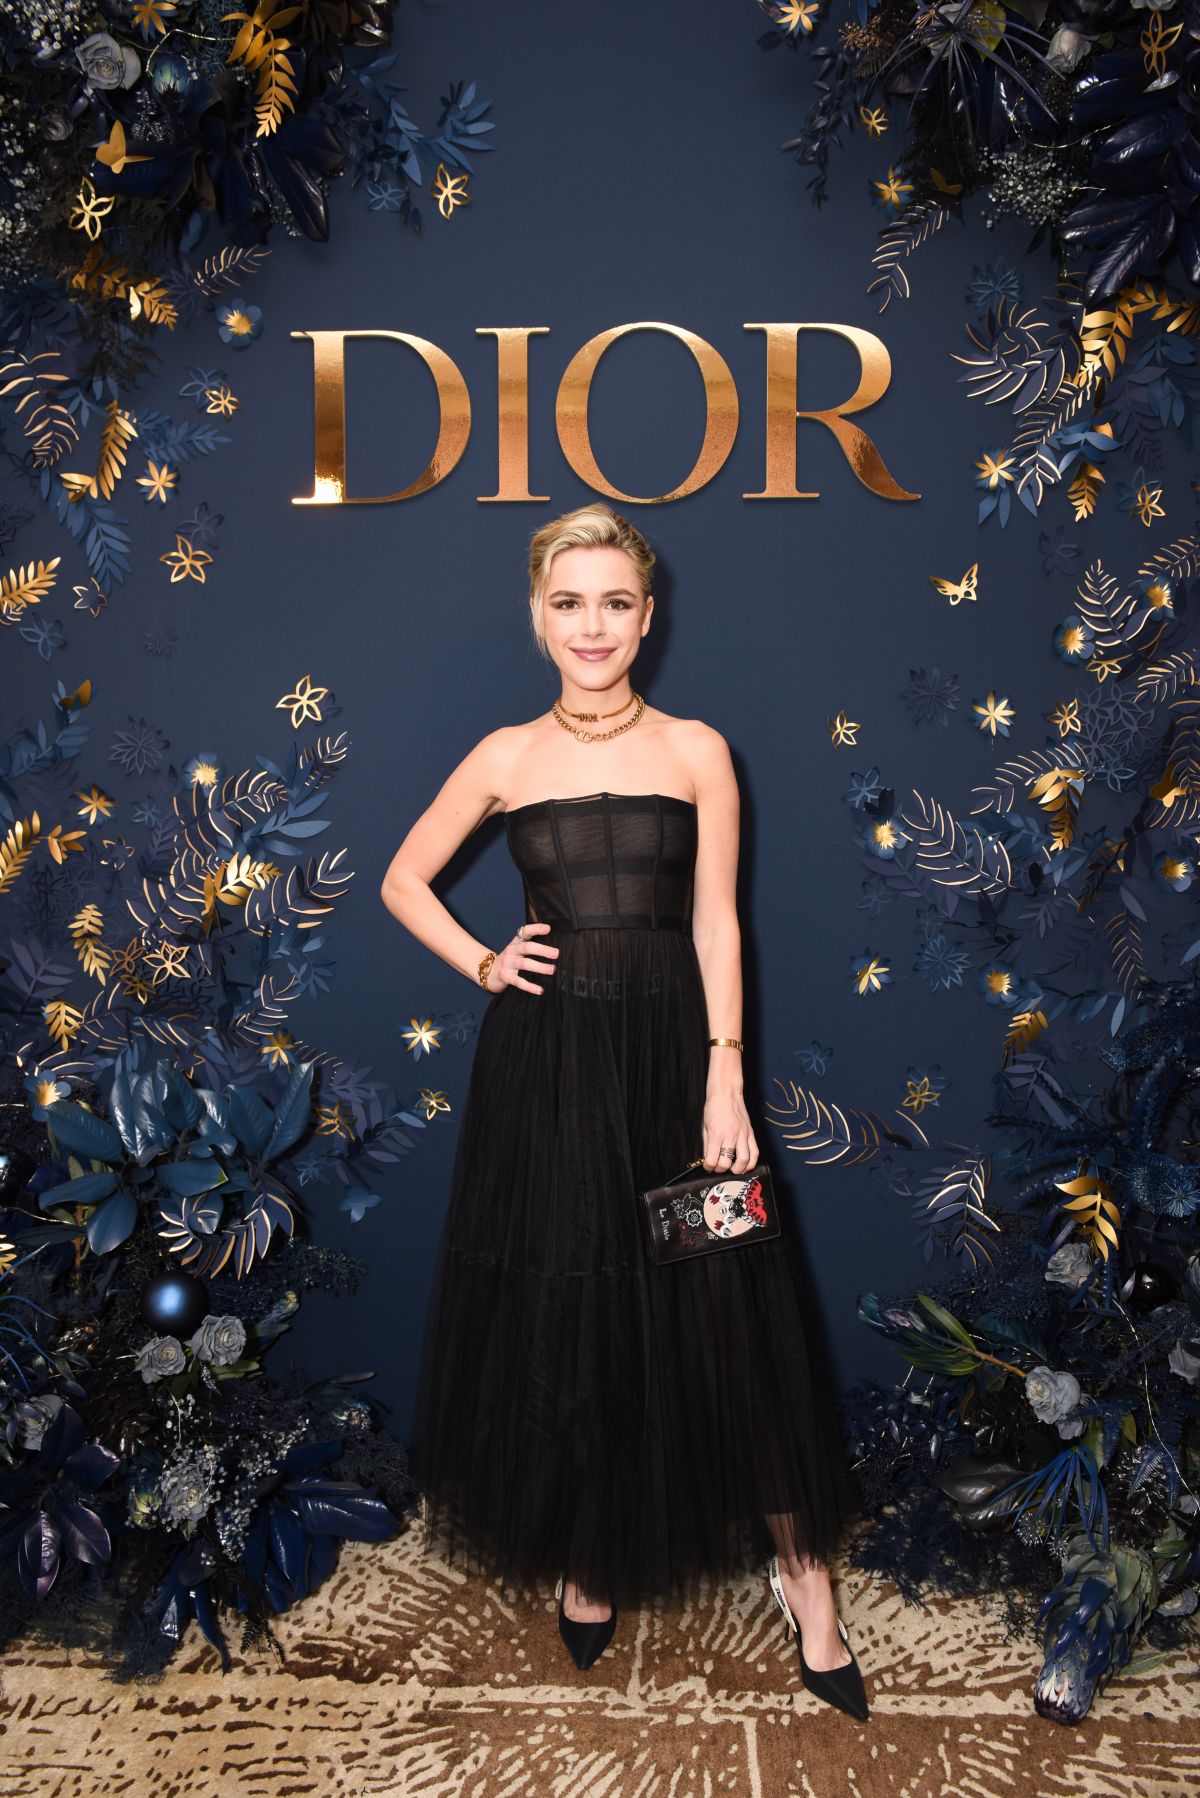 kiernan-shipka-at-dior-beauty-celebrates-j-adore-with-holiday-dinner-in-west-hollywood-12-14-2021-2.jpg